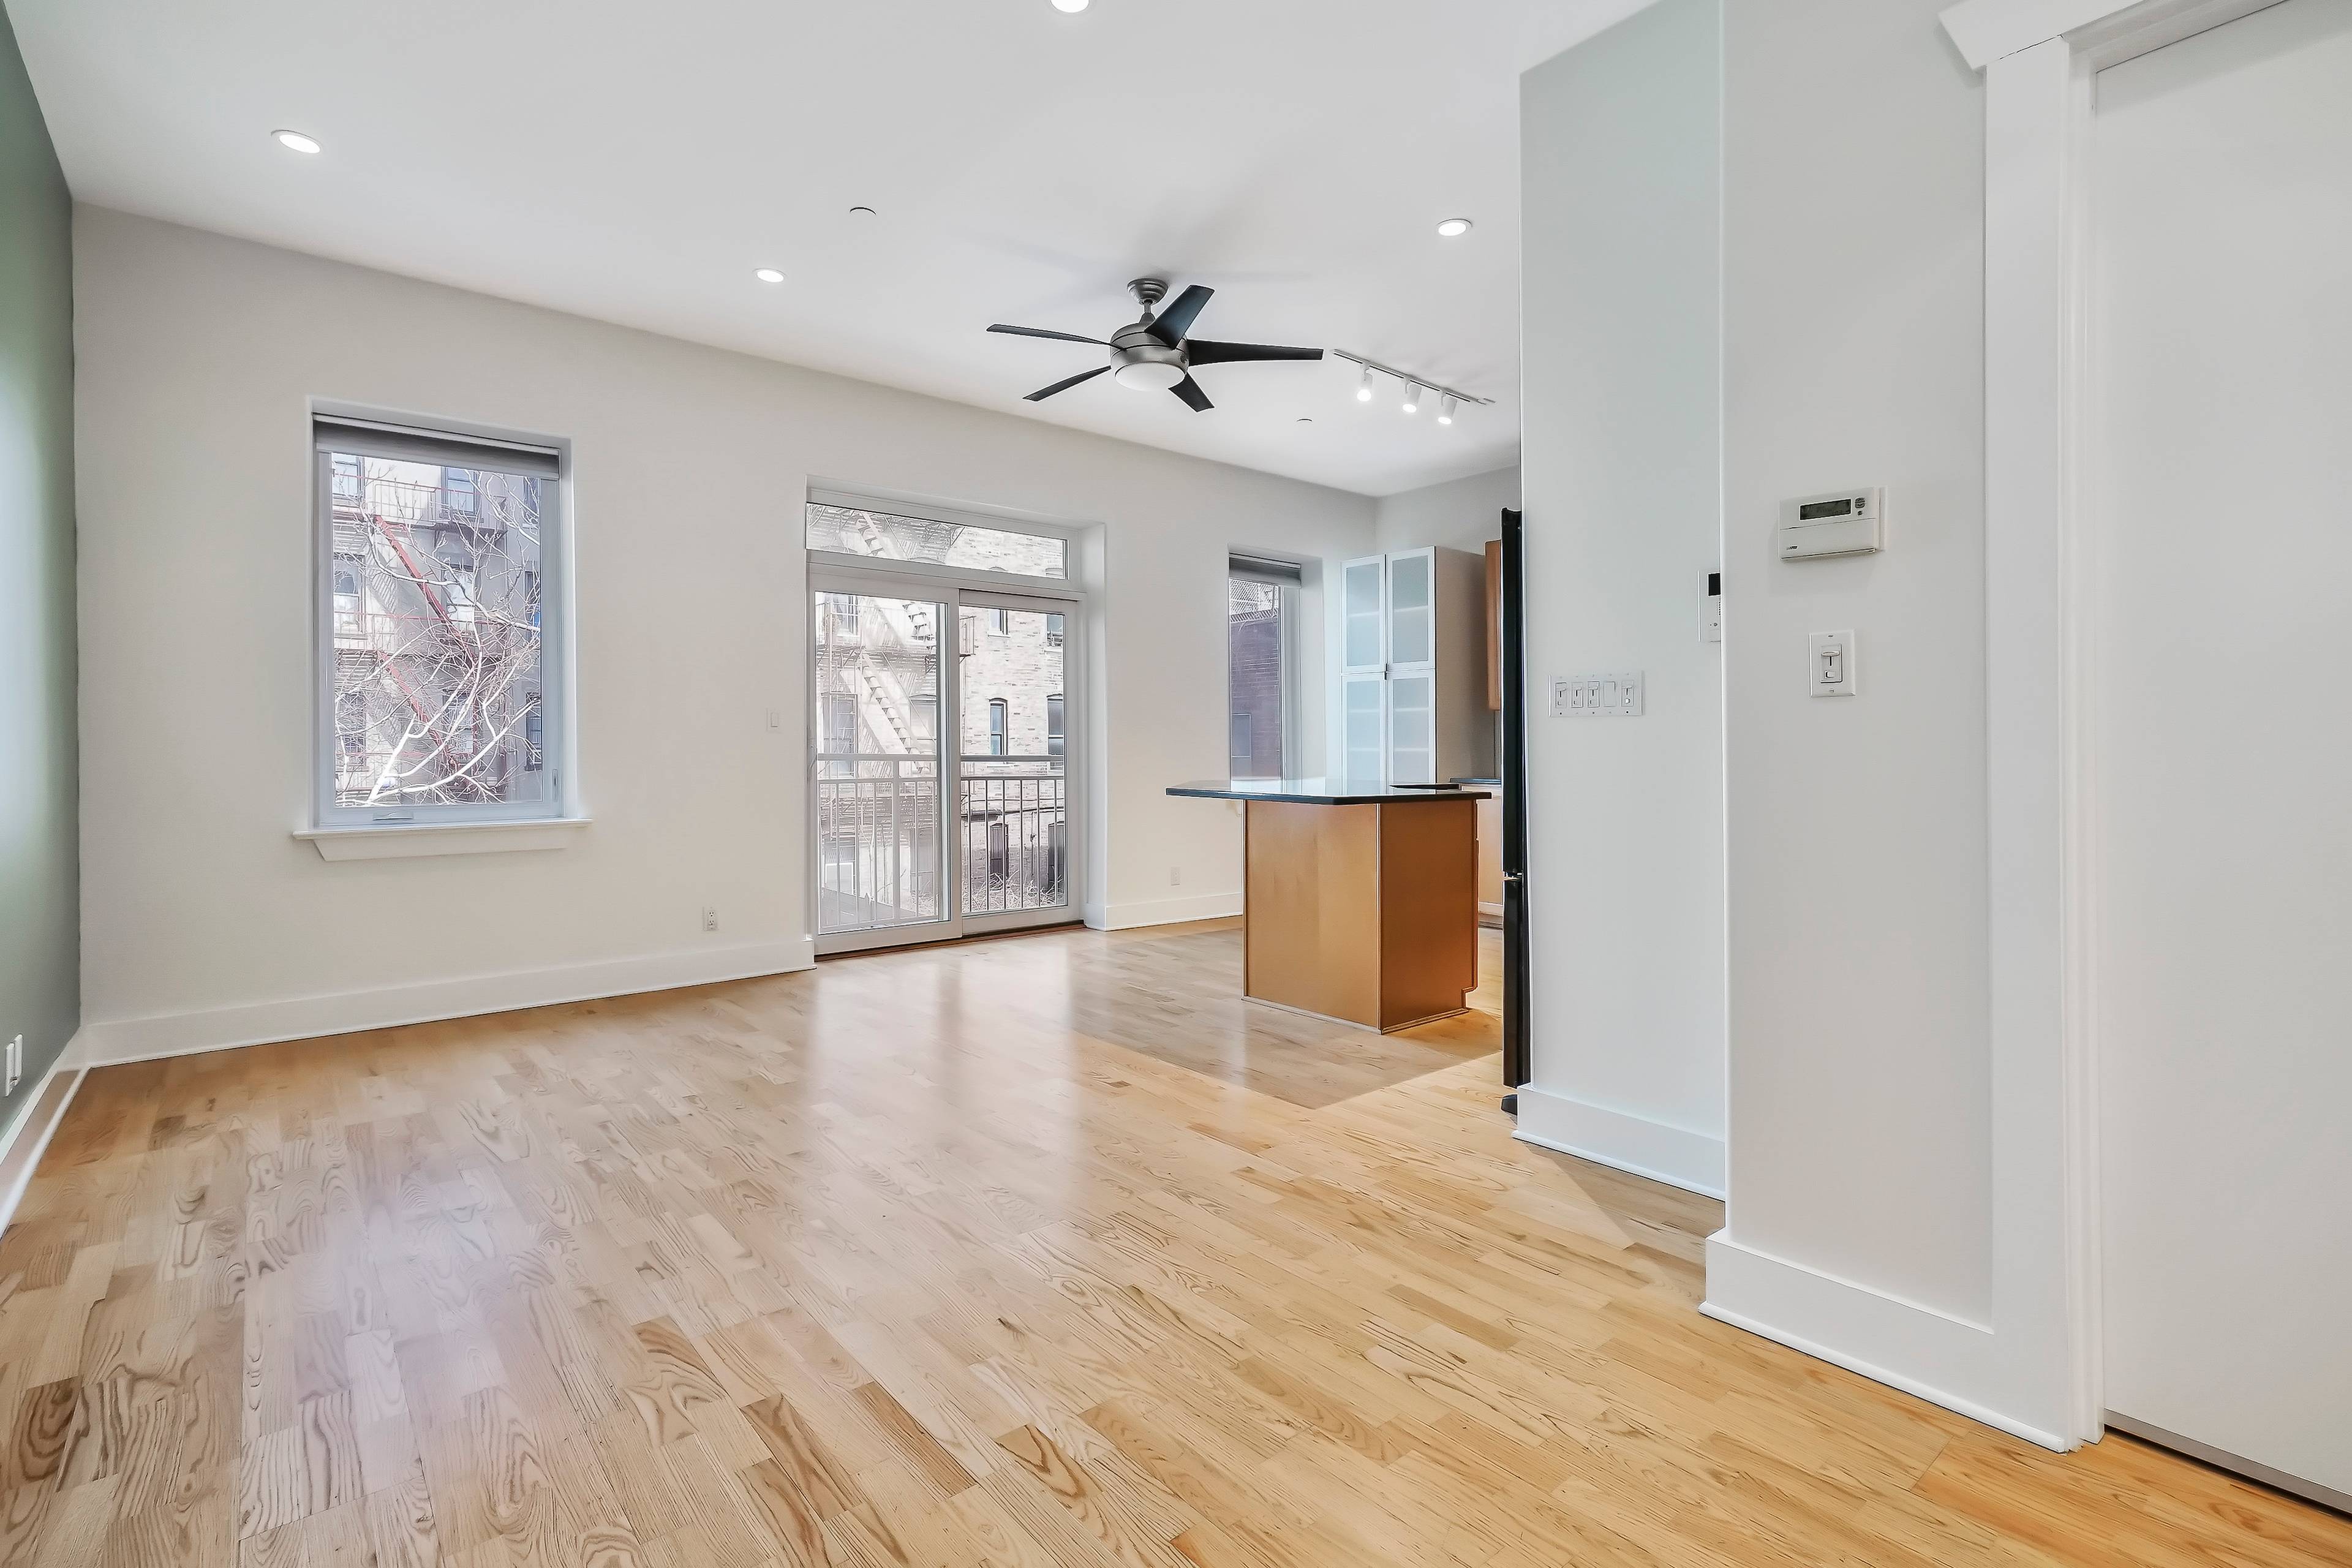 Immaculate 2 bed 2 bath, 1100 sf unit in a pristine boutique condo building on South 4th Street in Williamsburg.